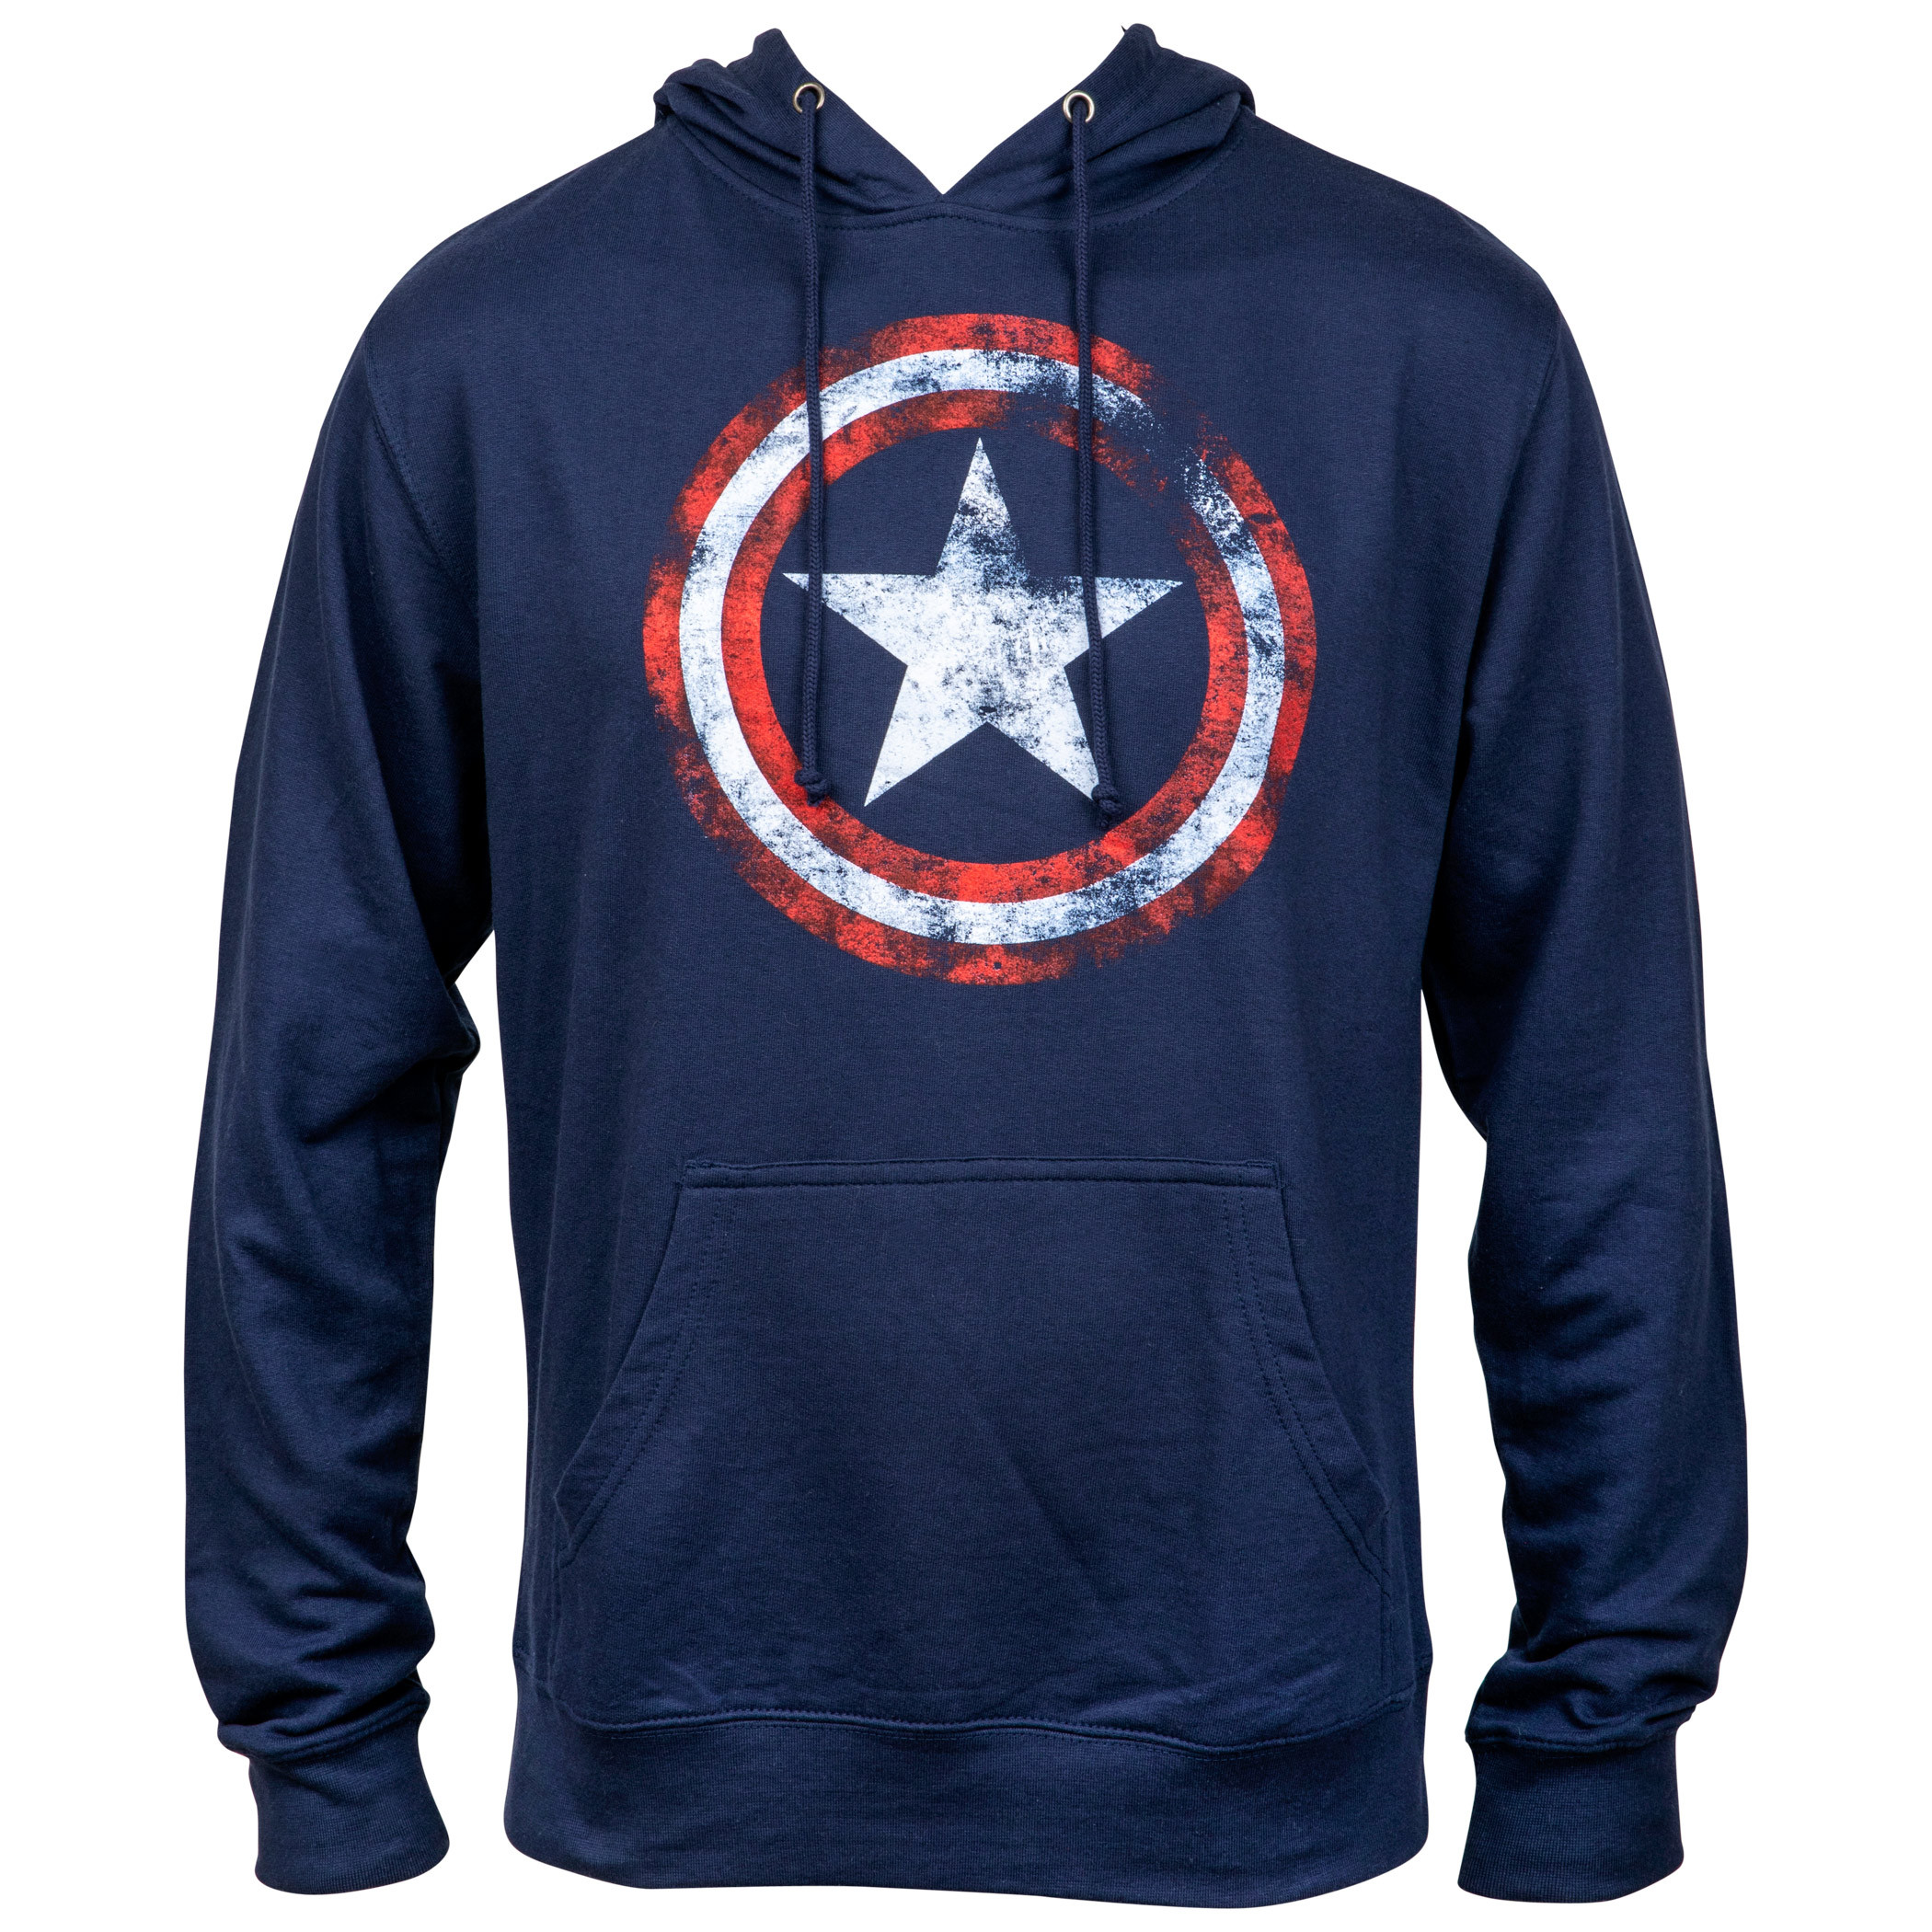 Captain America Distressed Navy Pullover Hoodie